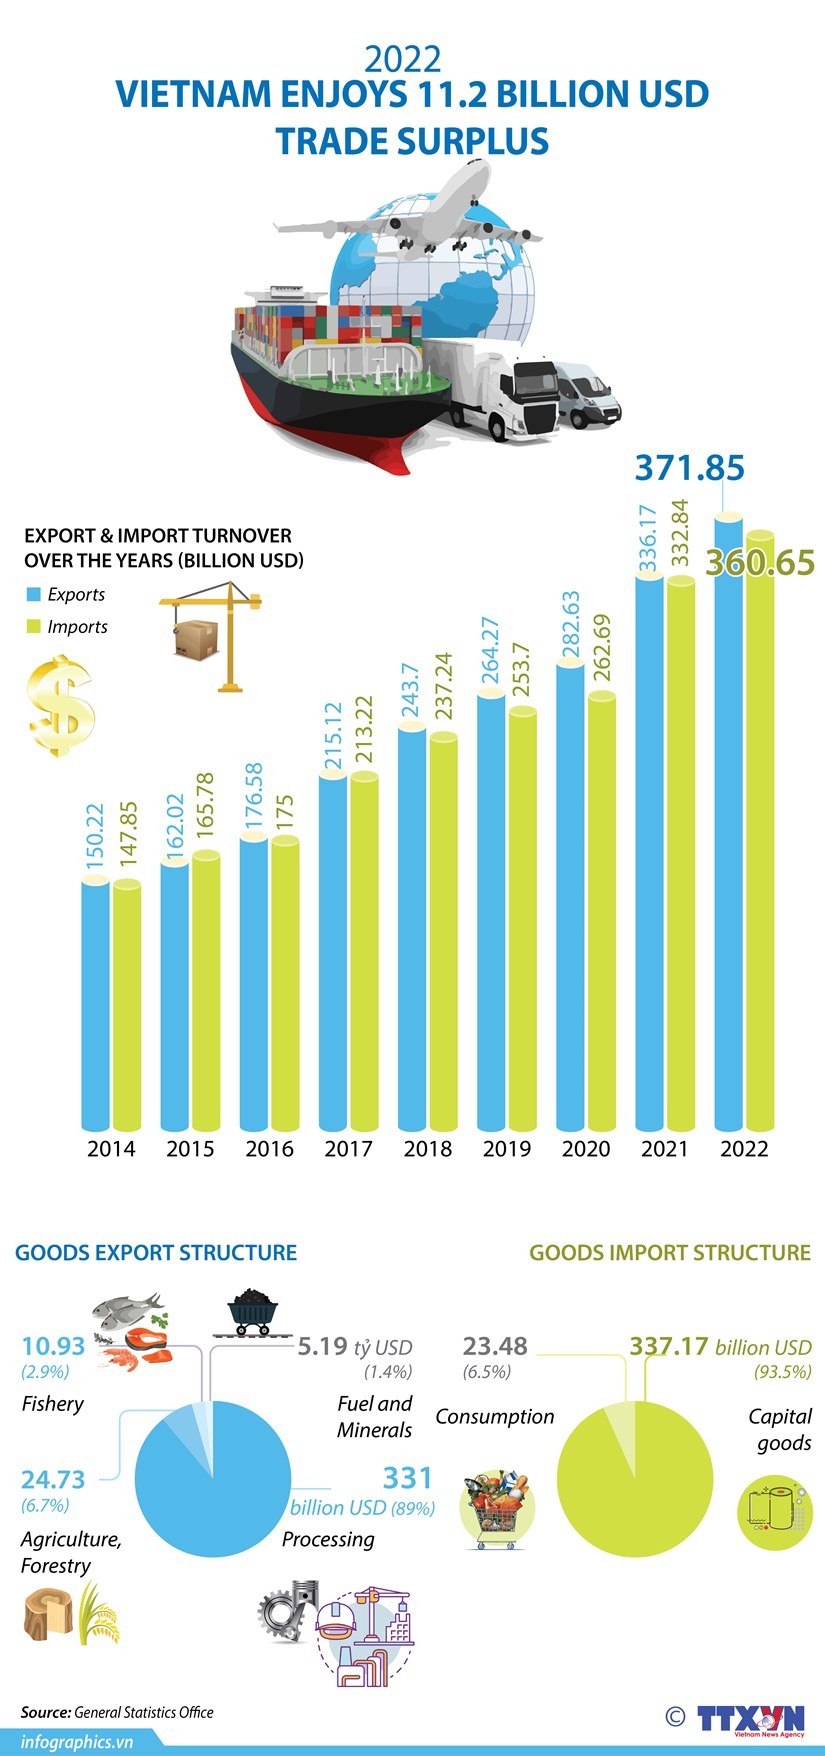 Vietnam's total import and export turnover in 2022 is estimated at 732.5 billion USD, up 9.5% compared to 2021, of which exports increase by 10.6% and imports by 8.4%. (Source: VNA)